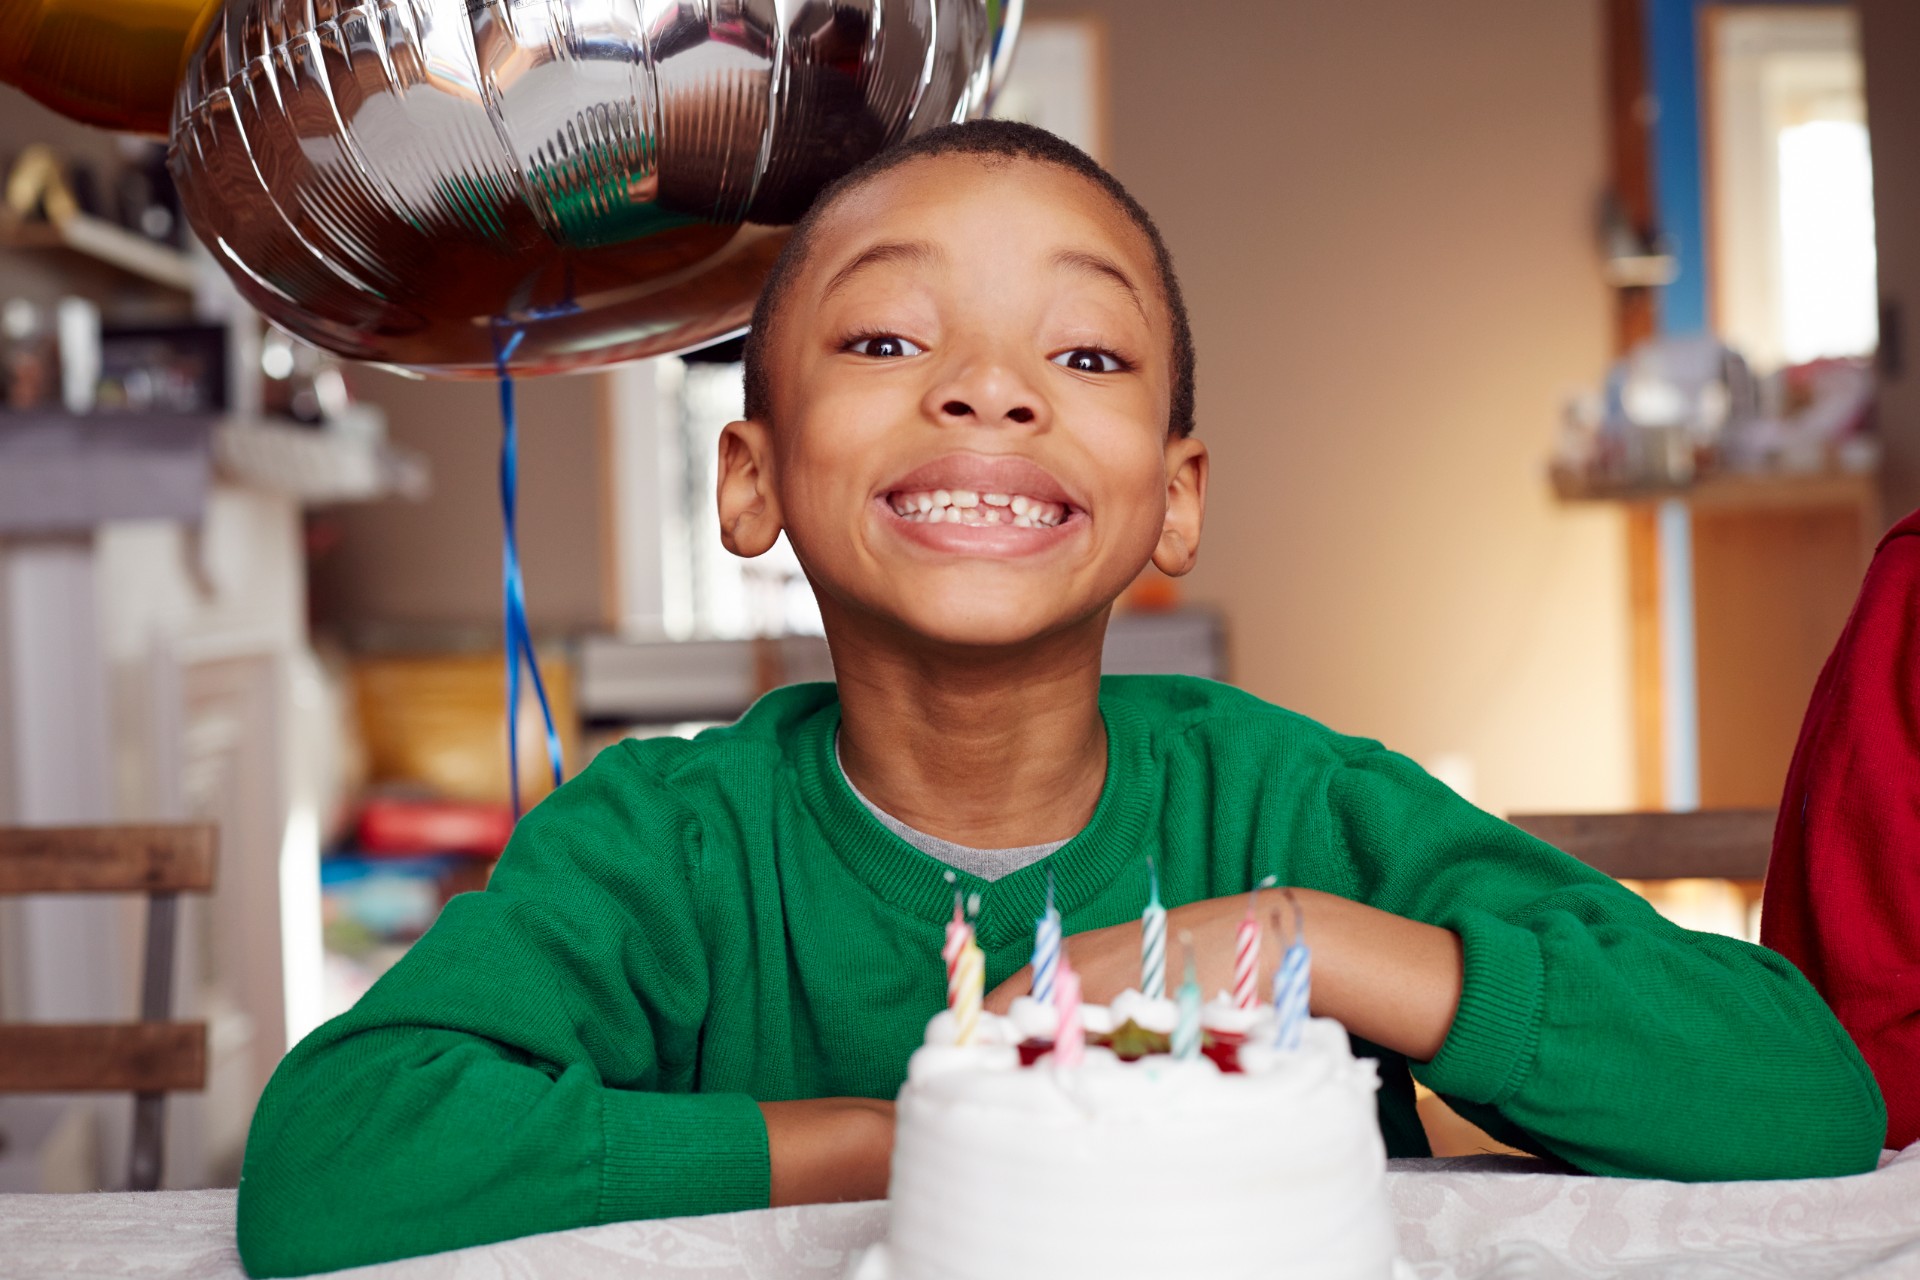 How to Host an 8-Year-Old's Birthday Party on a Budget